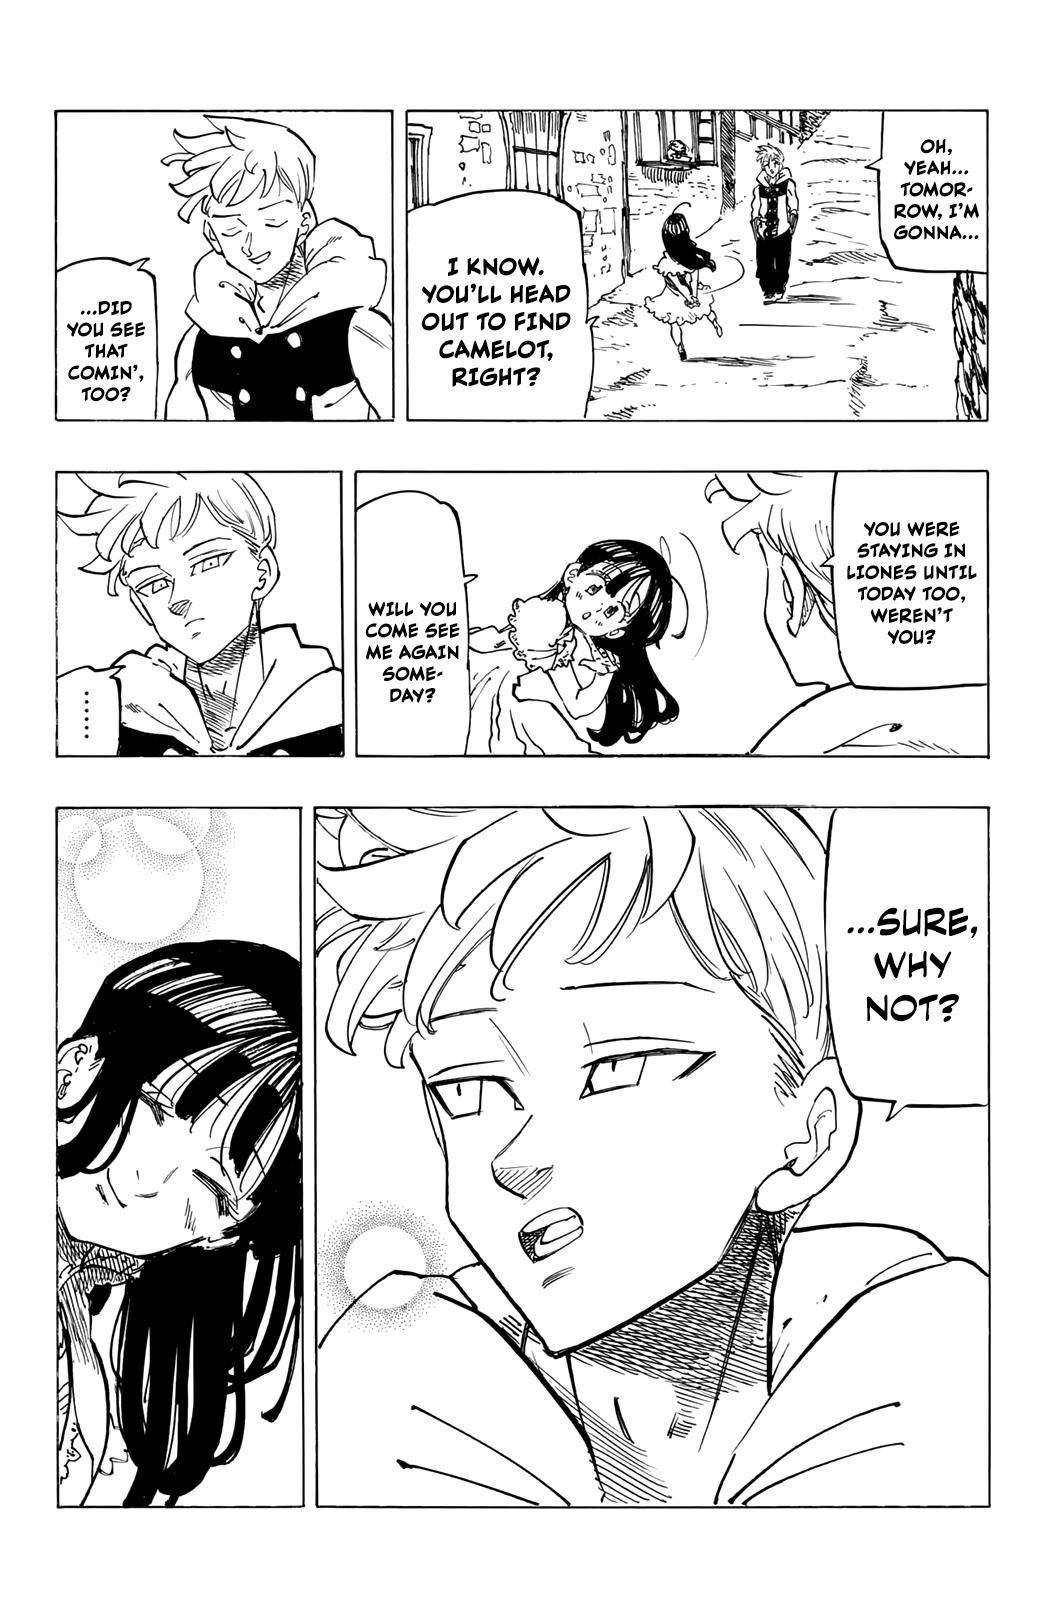 The Seven Deadly Sins: Four Knights of the Apocalypse Chapter 87